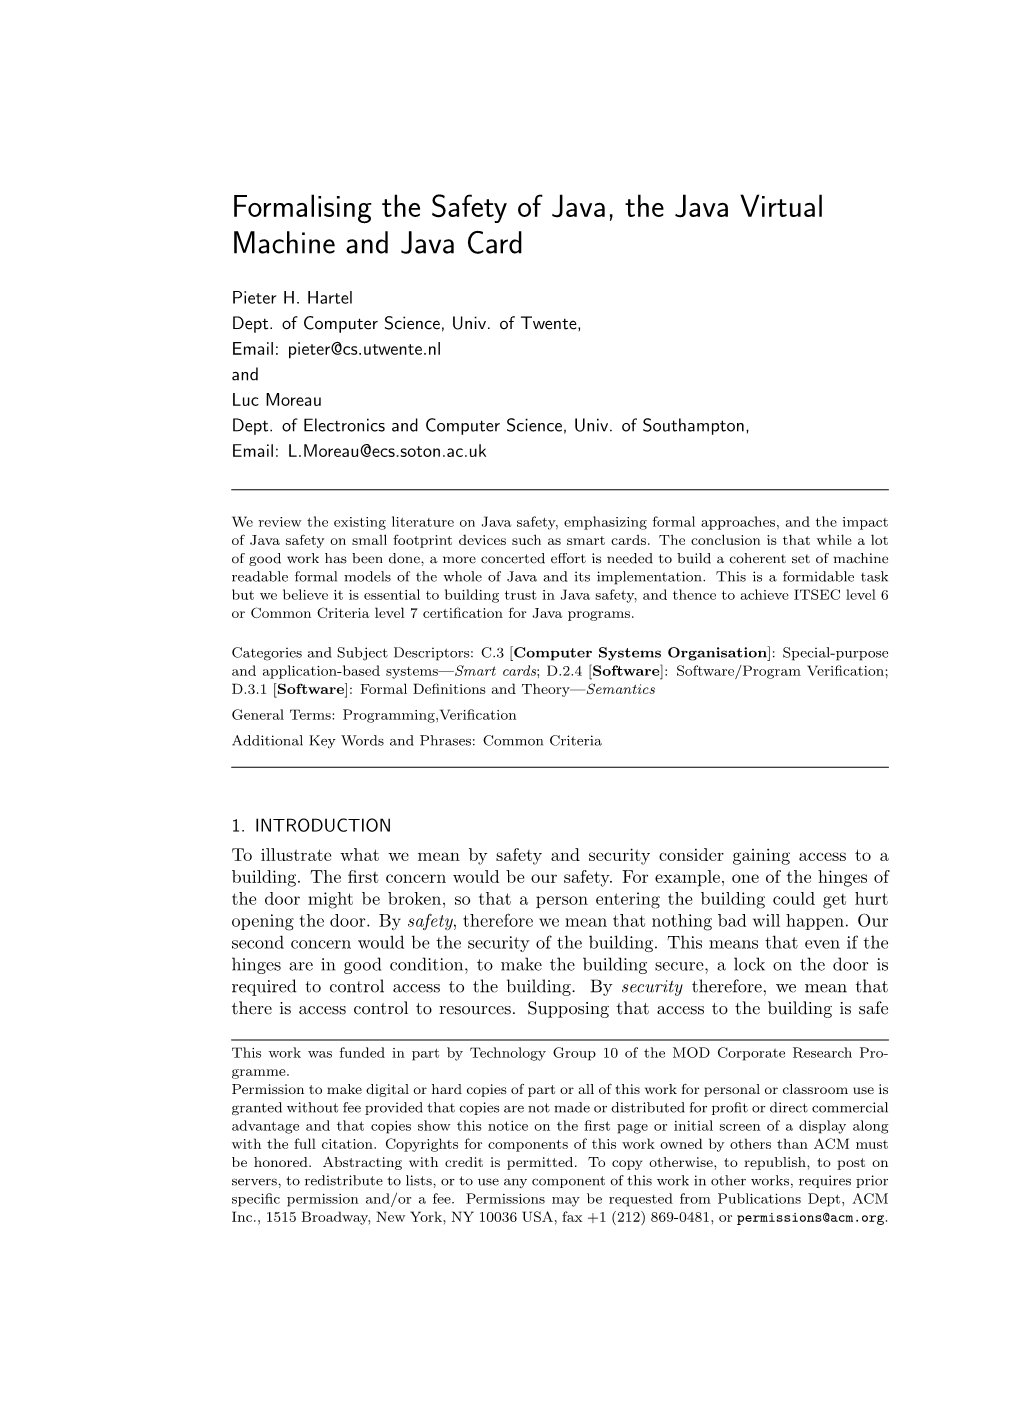 Formalising the Safety of Java, the Java Virtual Machine and Java Card